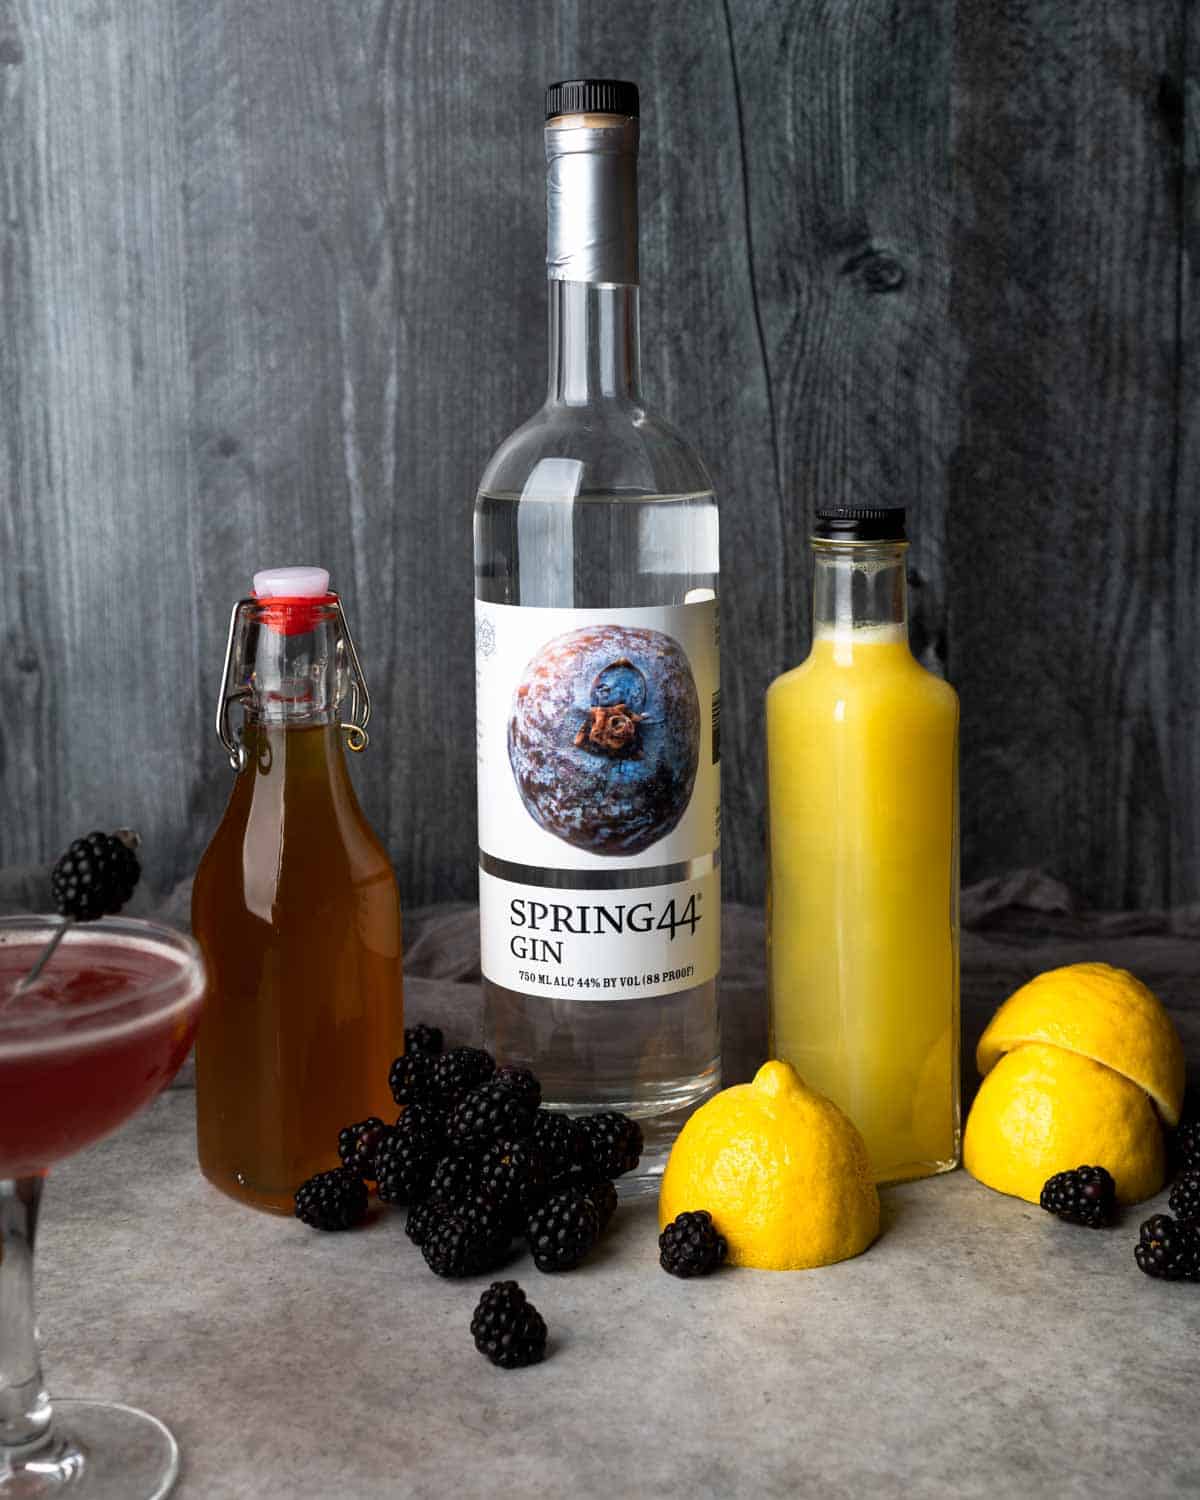 Image of ingredients needed to make this cocktail